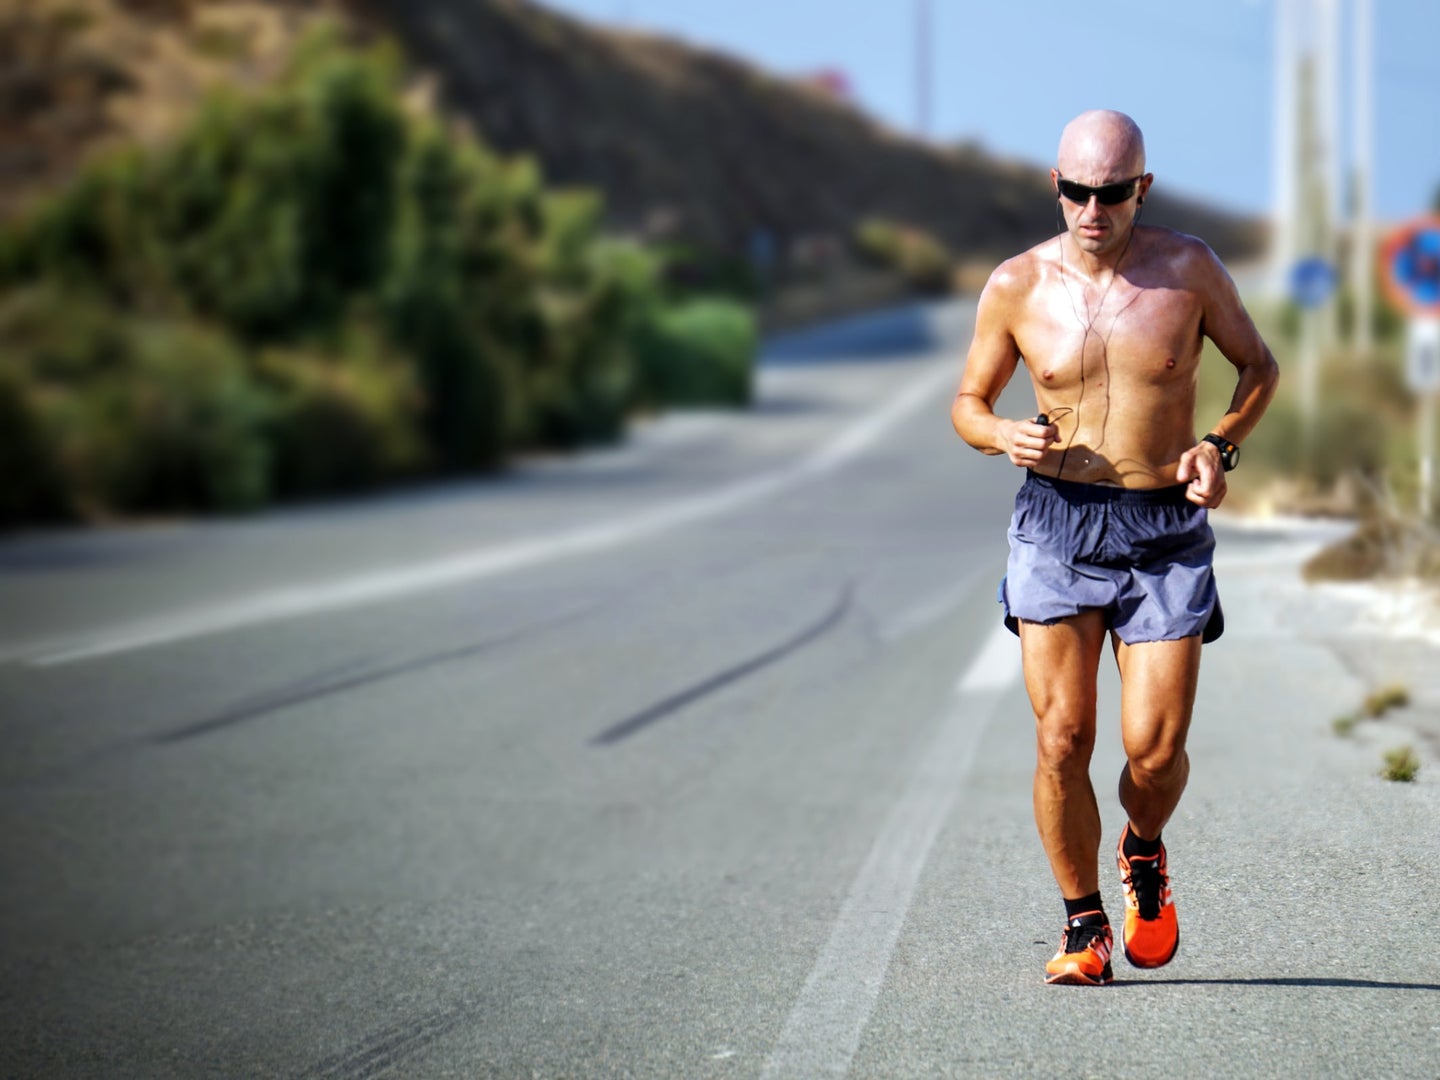 A man running shirtless on the side of a road in hot weather.